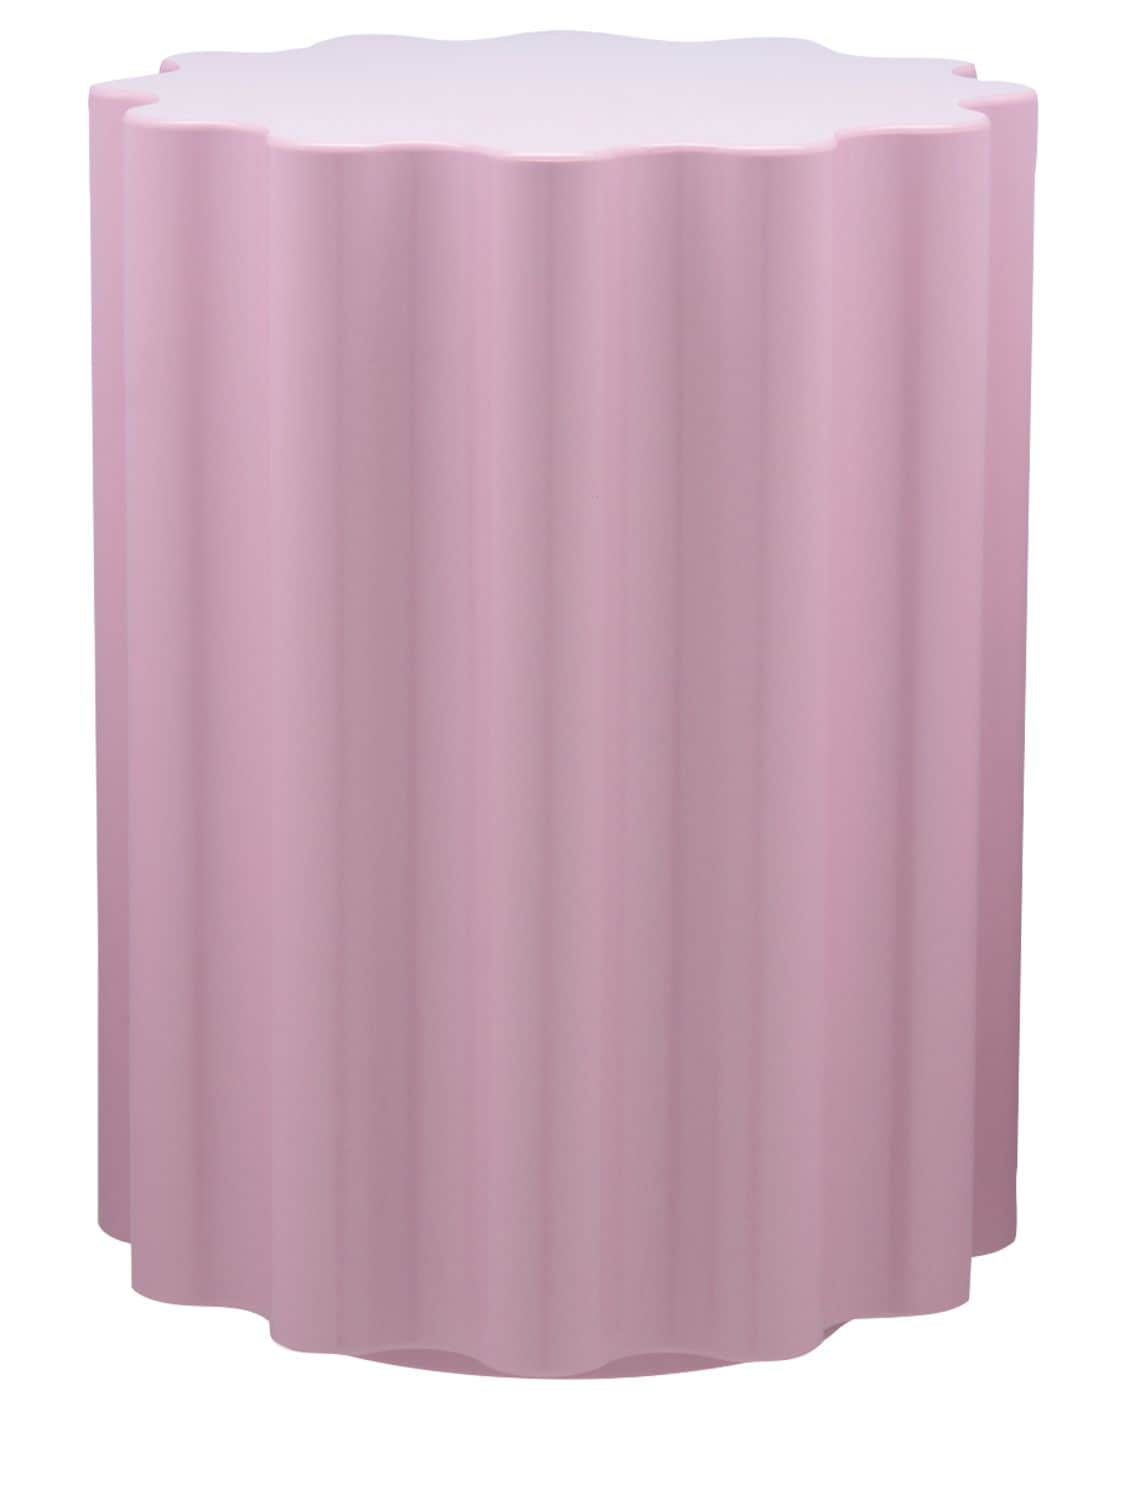 Kartell Colonna Table/stool In Pink